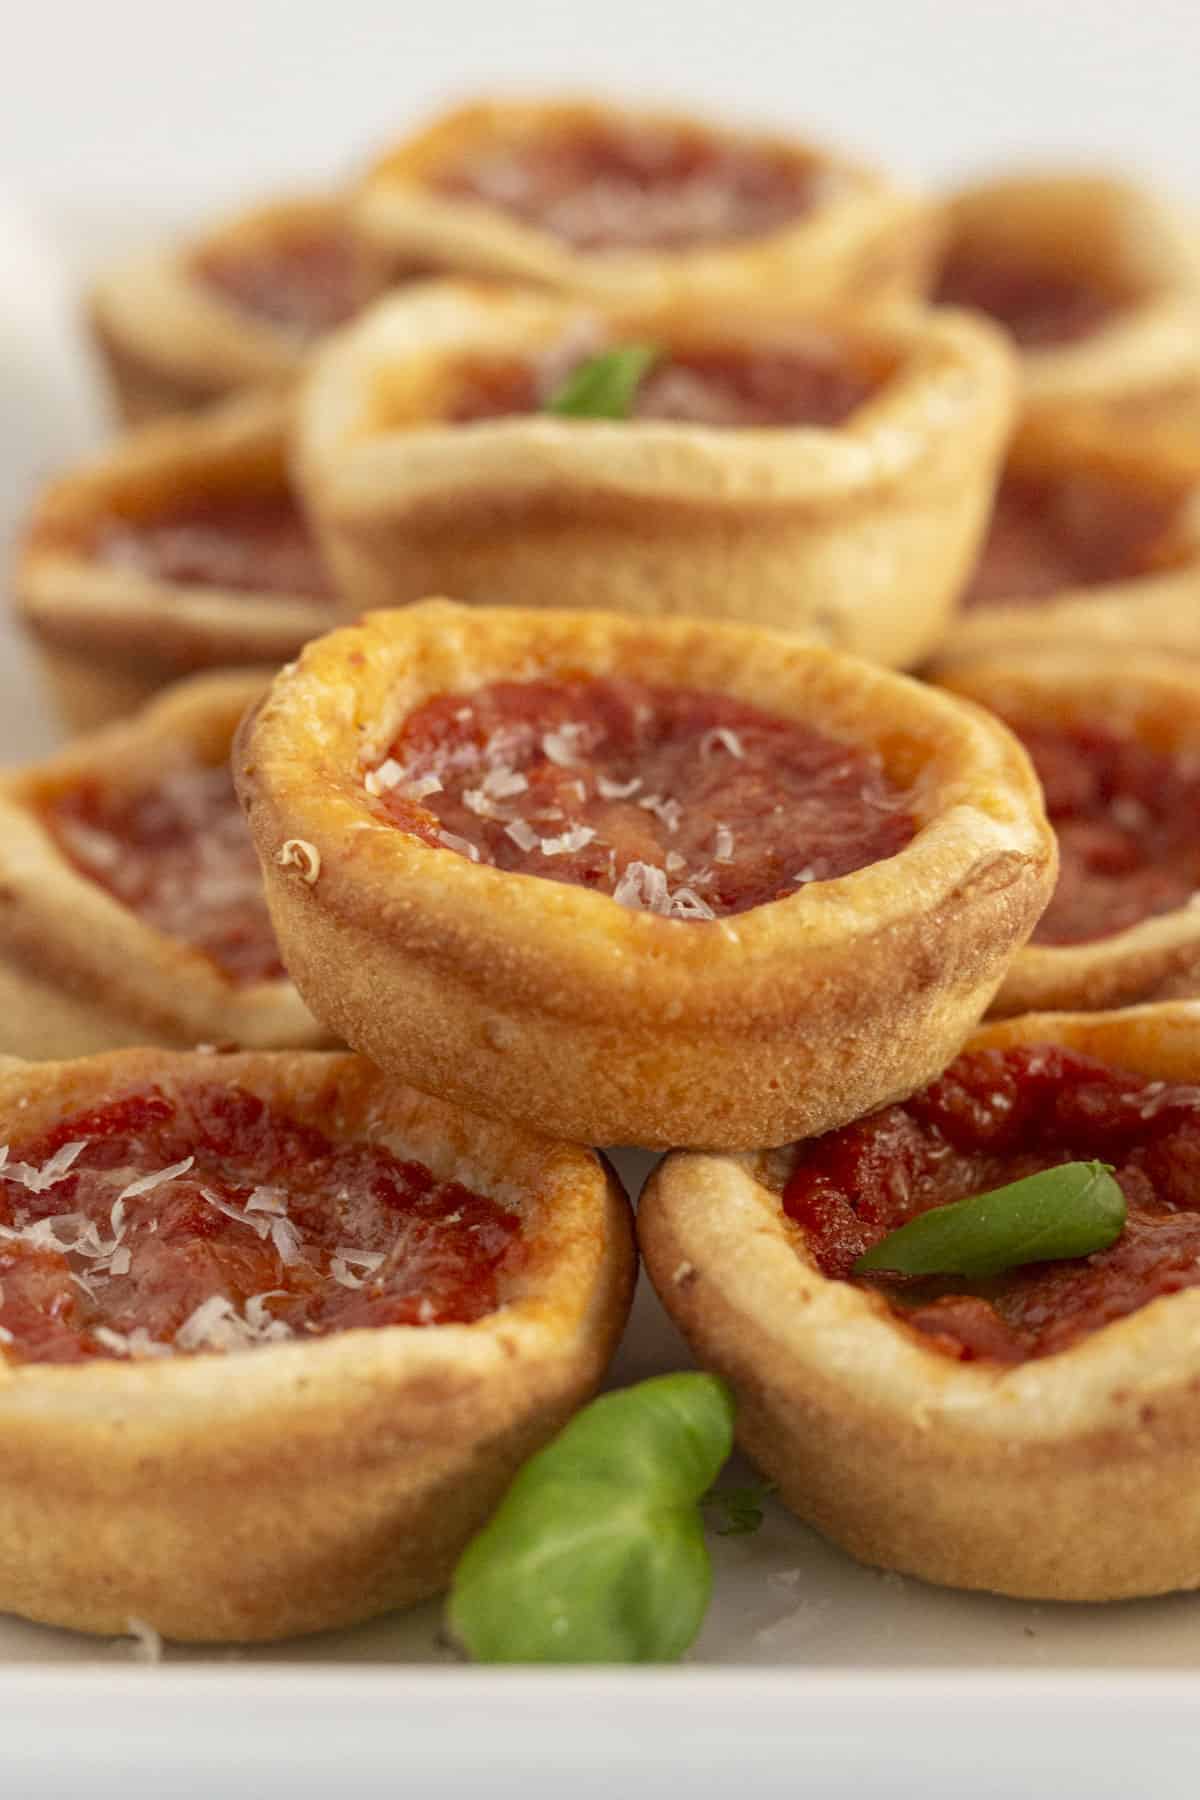 A plate full of mini deep dish pizzas with a few basil leaves.